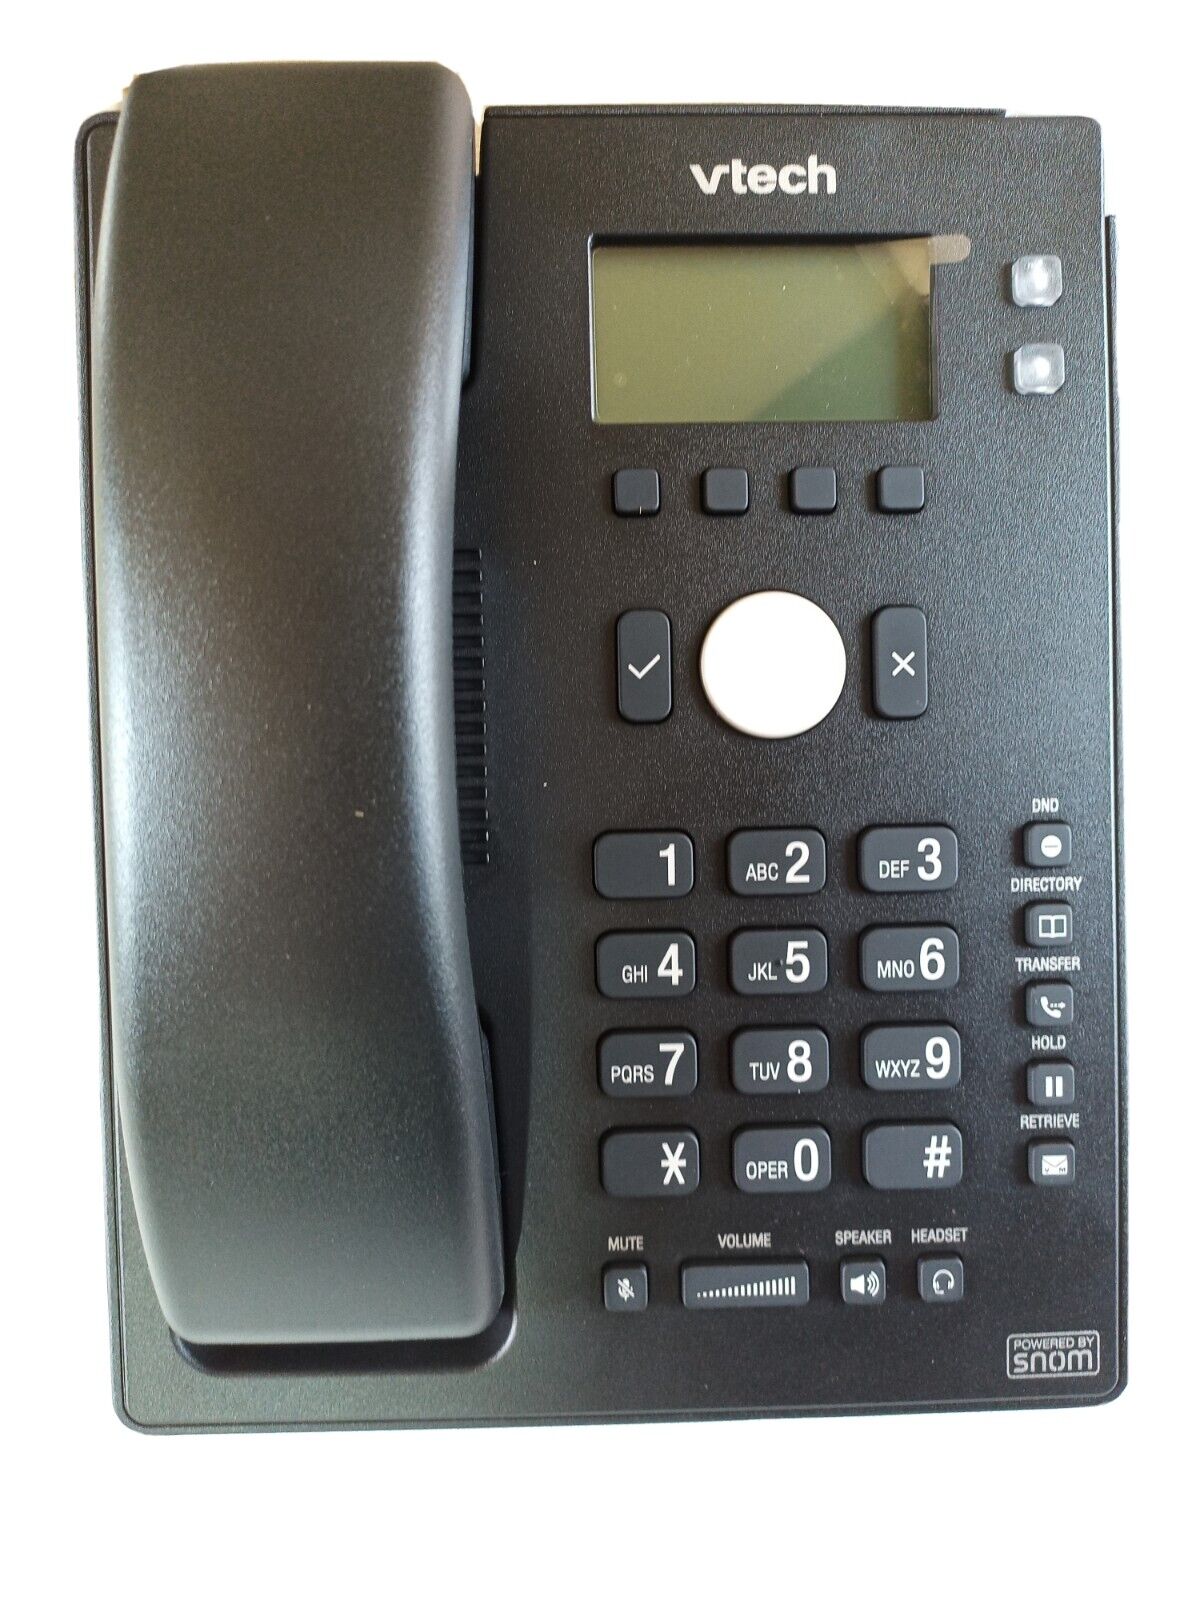 Vtech ET605 SIP VoIP Phone PoE Works Great with Asterisk/FreePBX